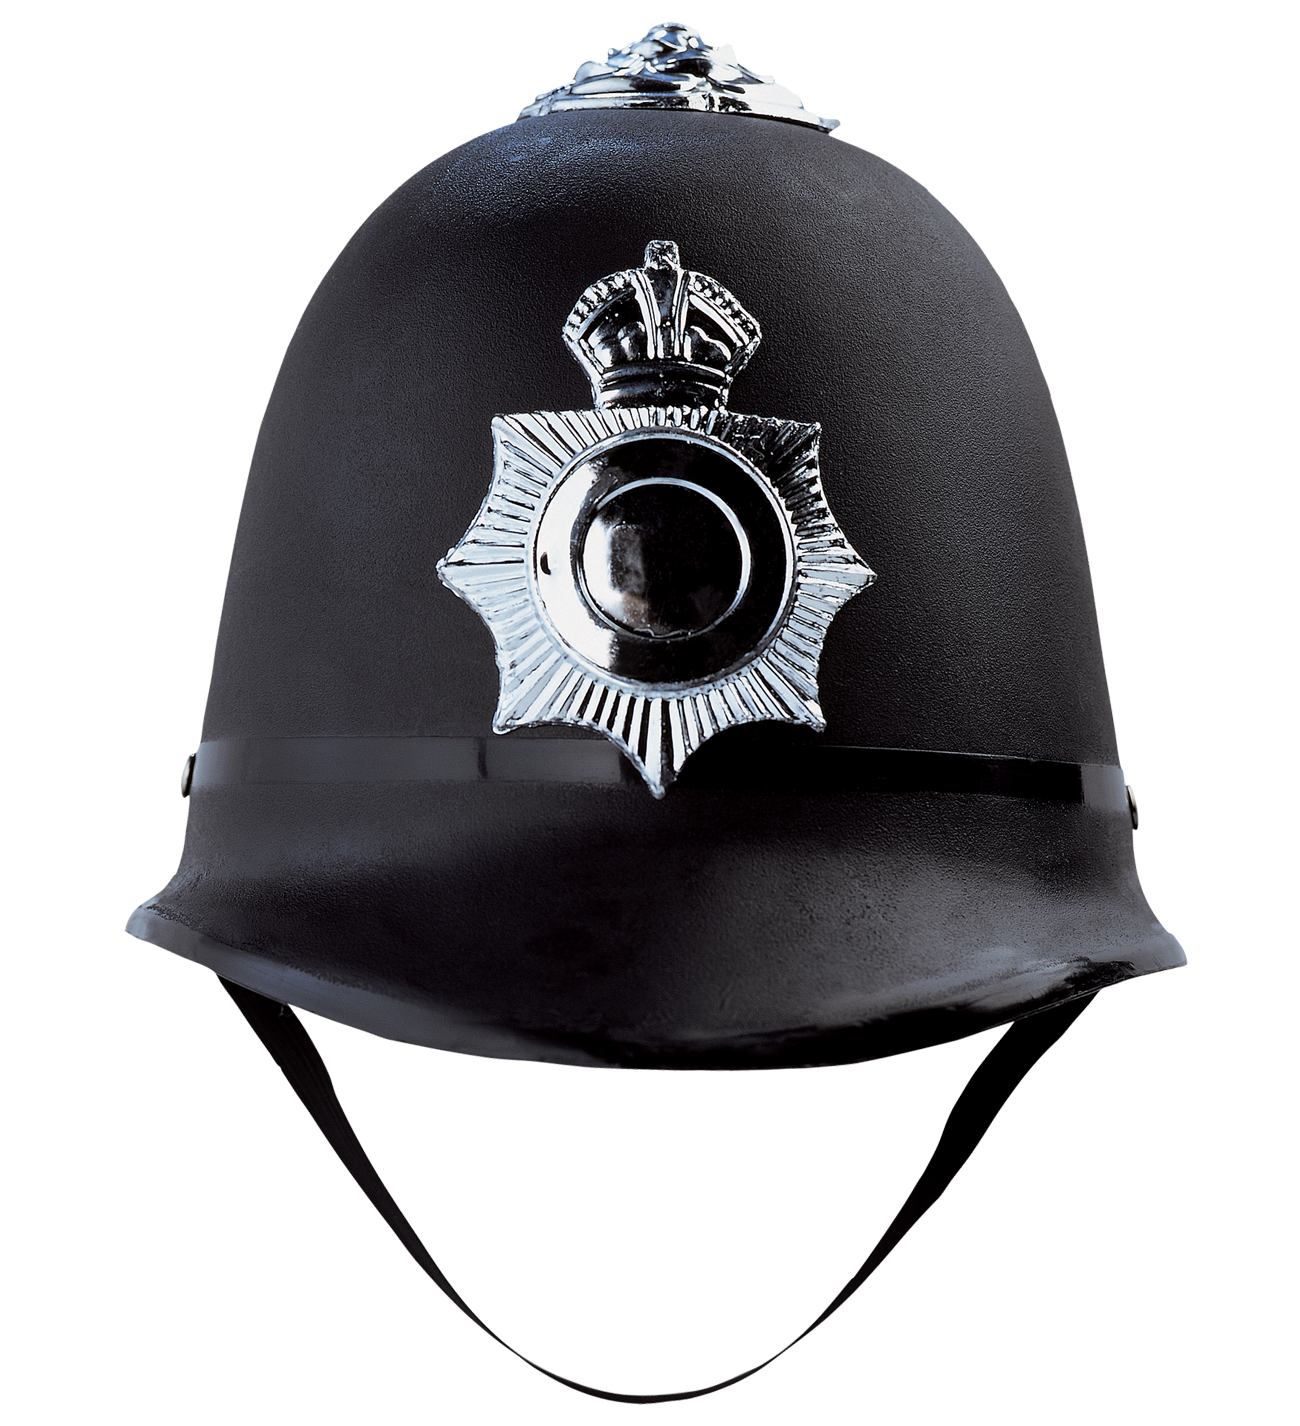 A Black Helmet With A Silver Badge On It